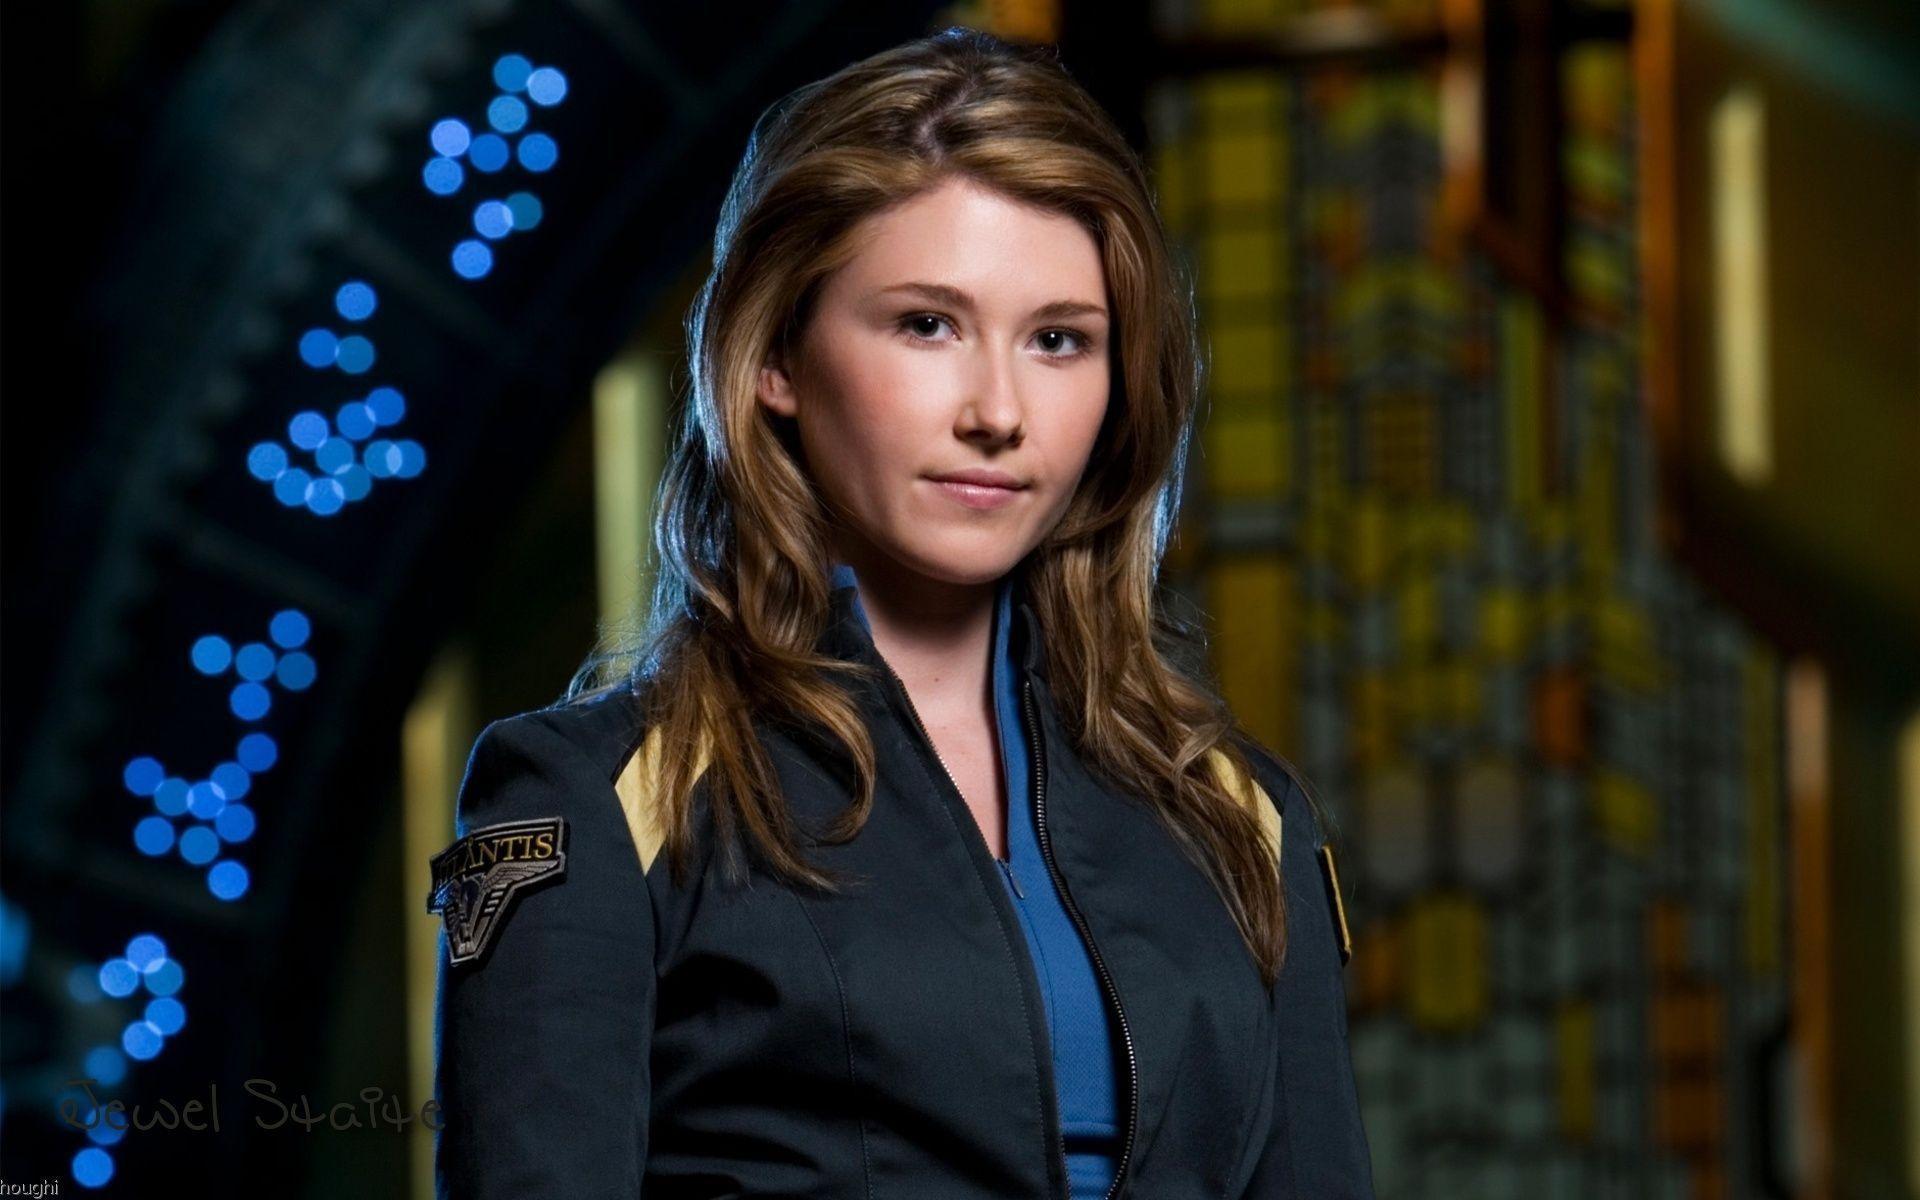 Jewel Staite Wallpapers Wallpaper Cave HD Wallpapers Download Free Map Images Wallpaper [wallpaper684.blogspot.com]